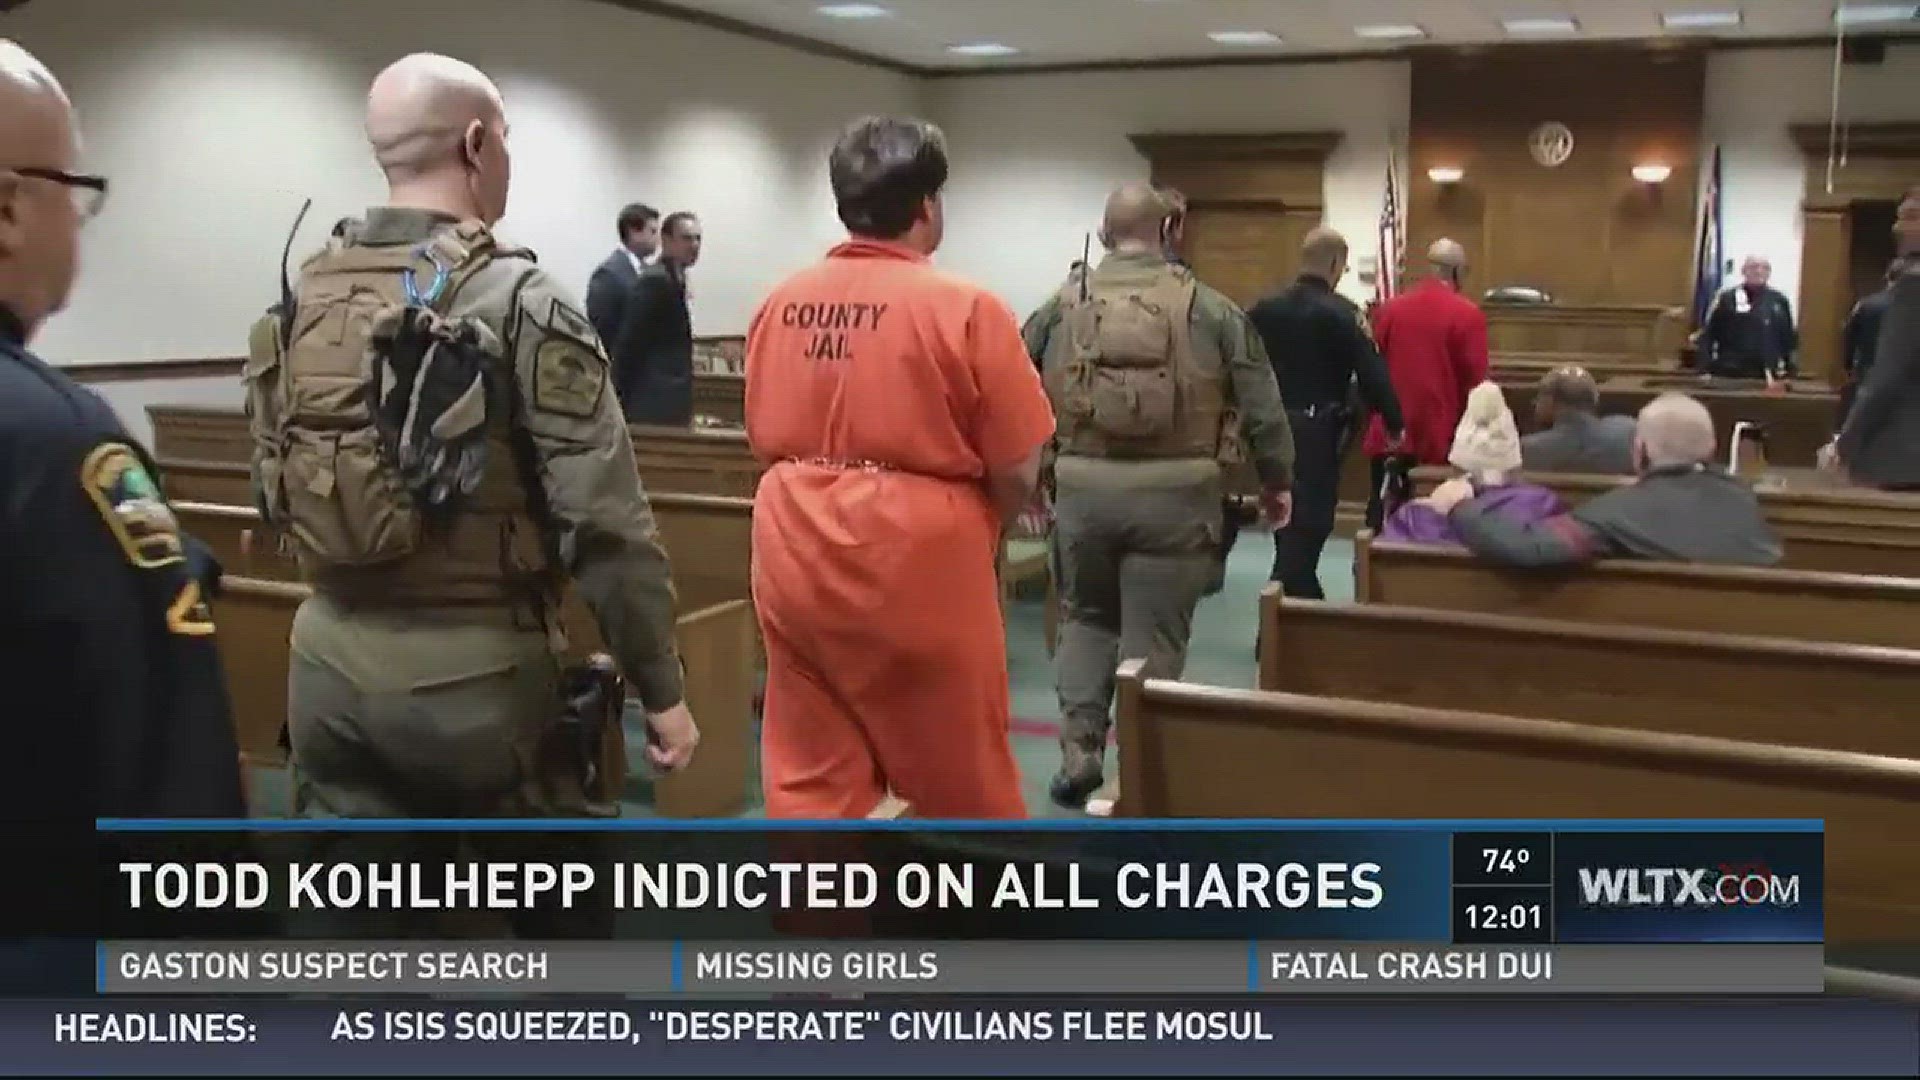 A grand jury has indicted Todd Kohlhepp on all charges.